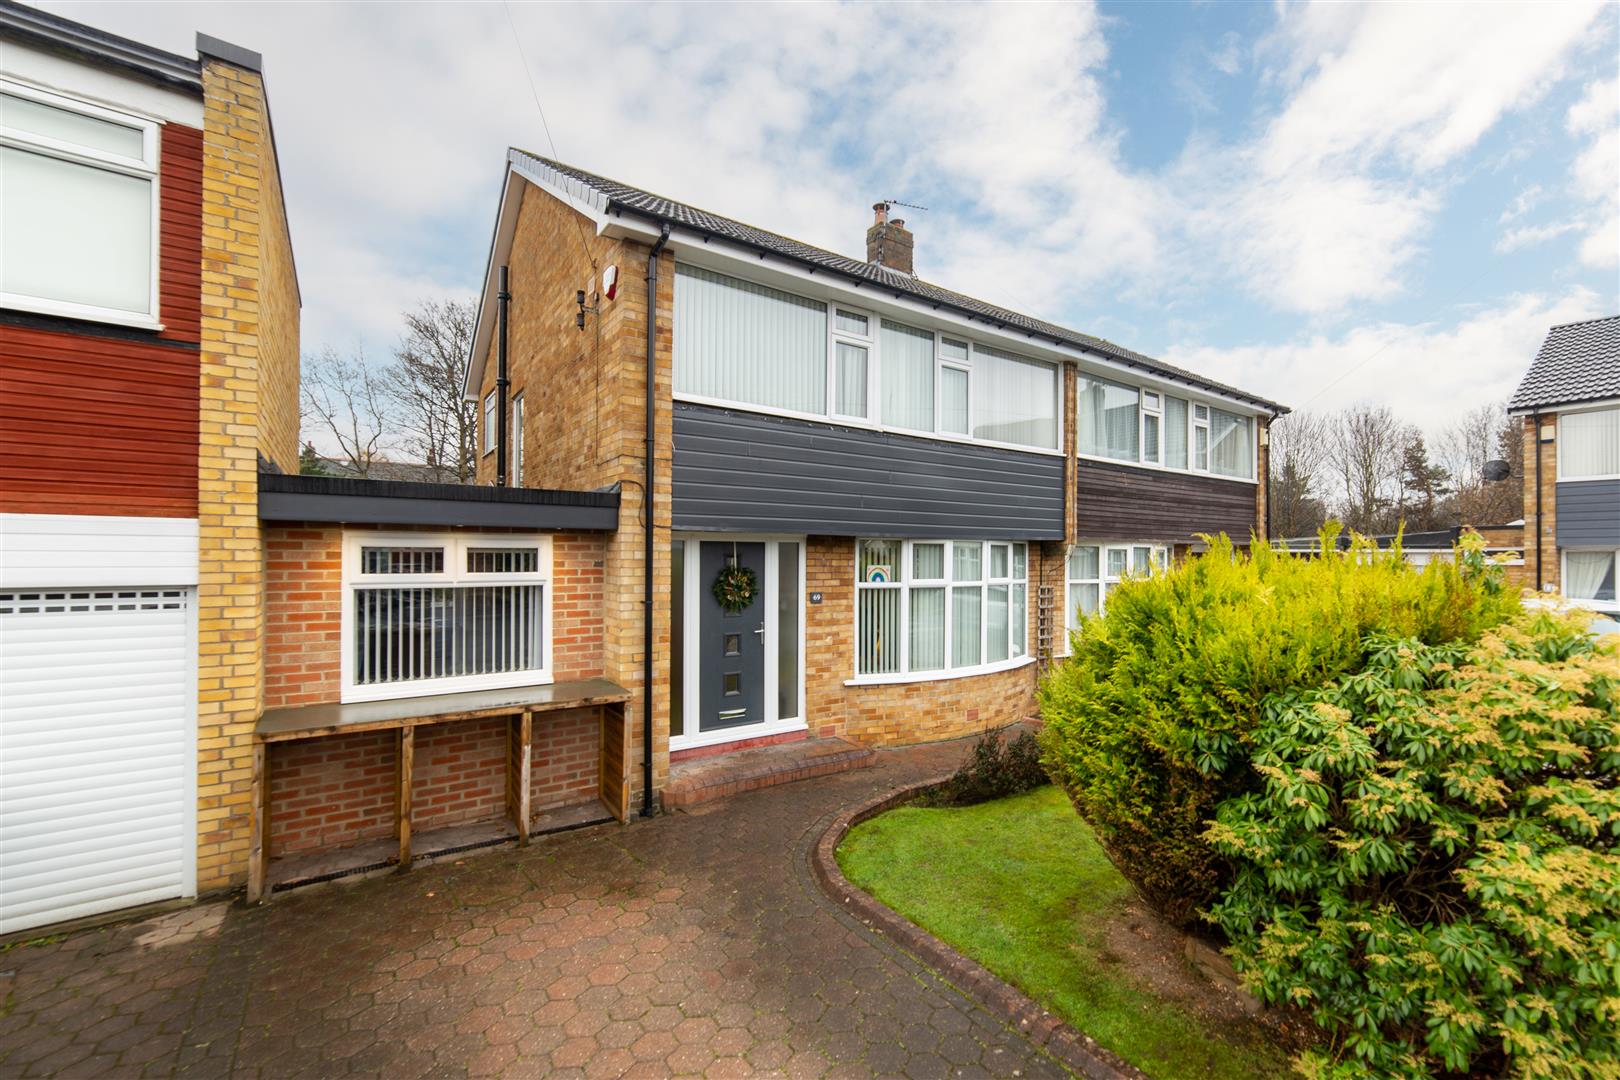 3 bed semi-detached house for sale in The Fairway, Brunton Park - Property Image 1